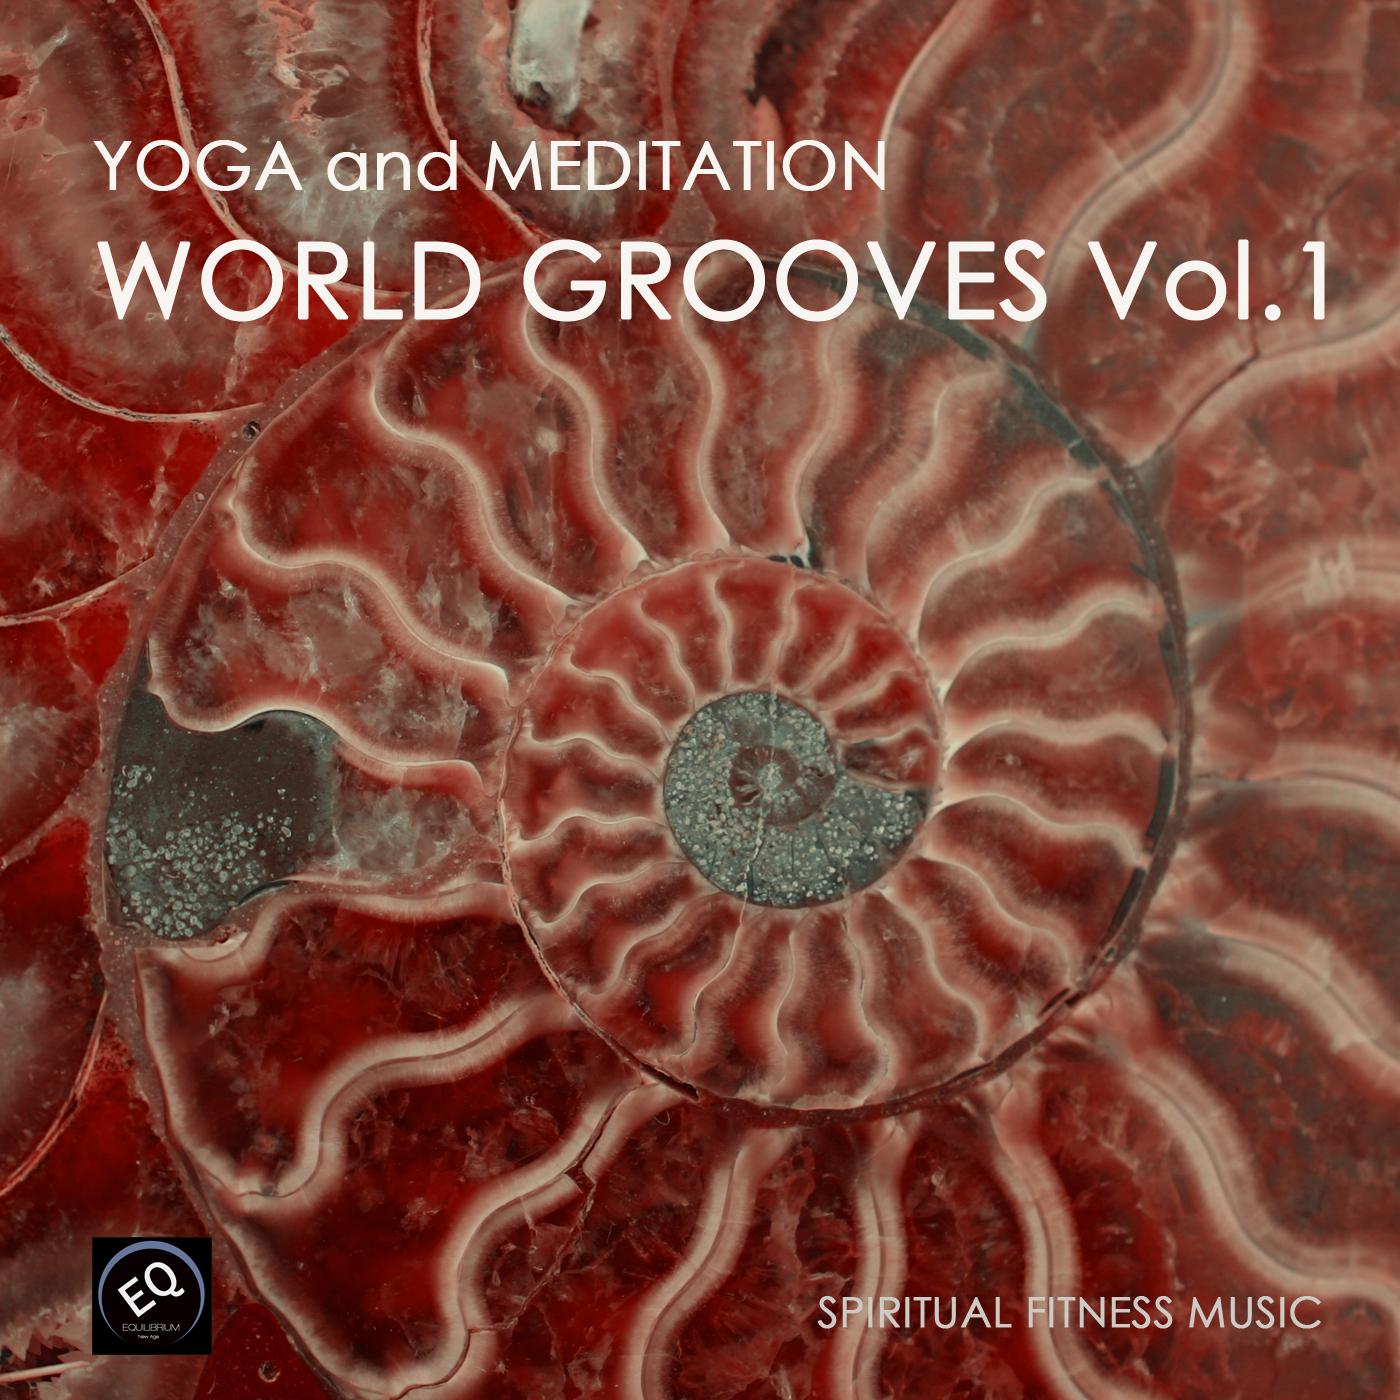 Yoga and Meditation World Grooves Vol.1 - Yoga Fitness Chillout Lounge Collection (Meditate, Zen, Relax, Stretch, Breathe, Exercise, Health, Weight Loss, Abs)